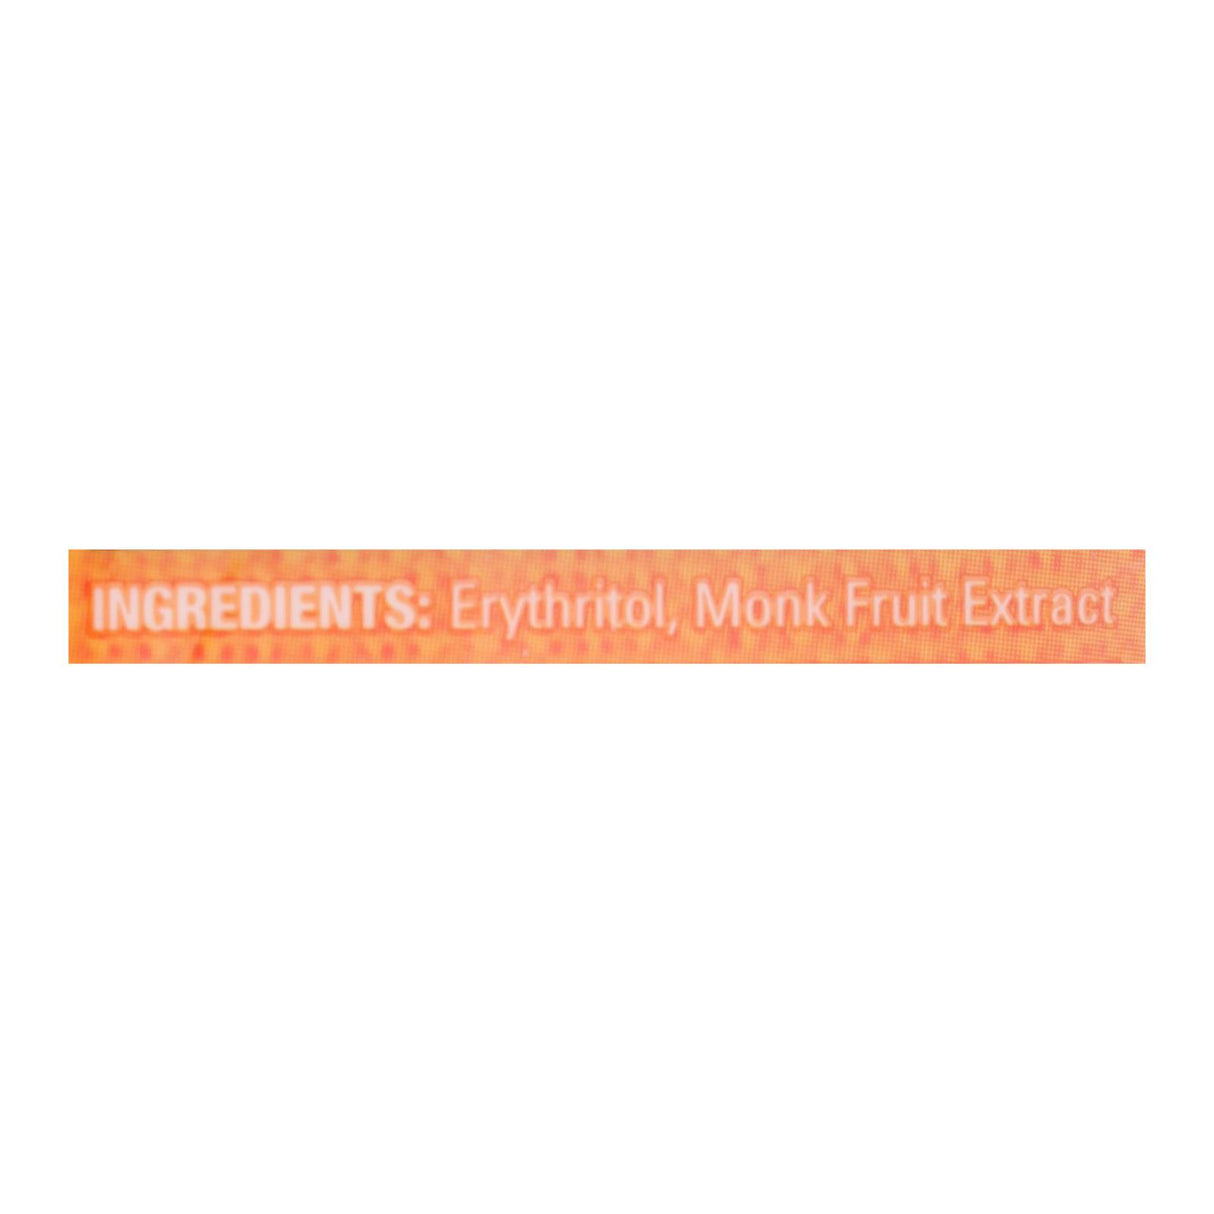 In The Raw Monk Fruit in Raw with Erythritol 8-Pack, 16 Oz. Each - Cozy Farm 